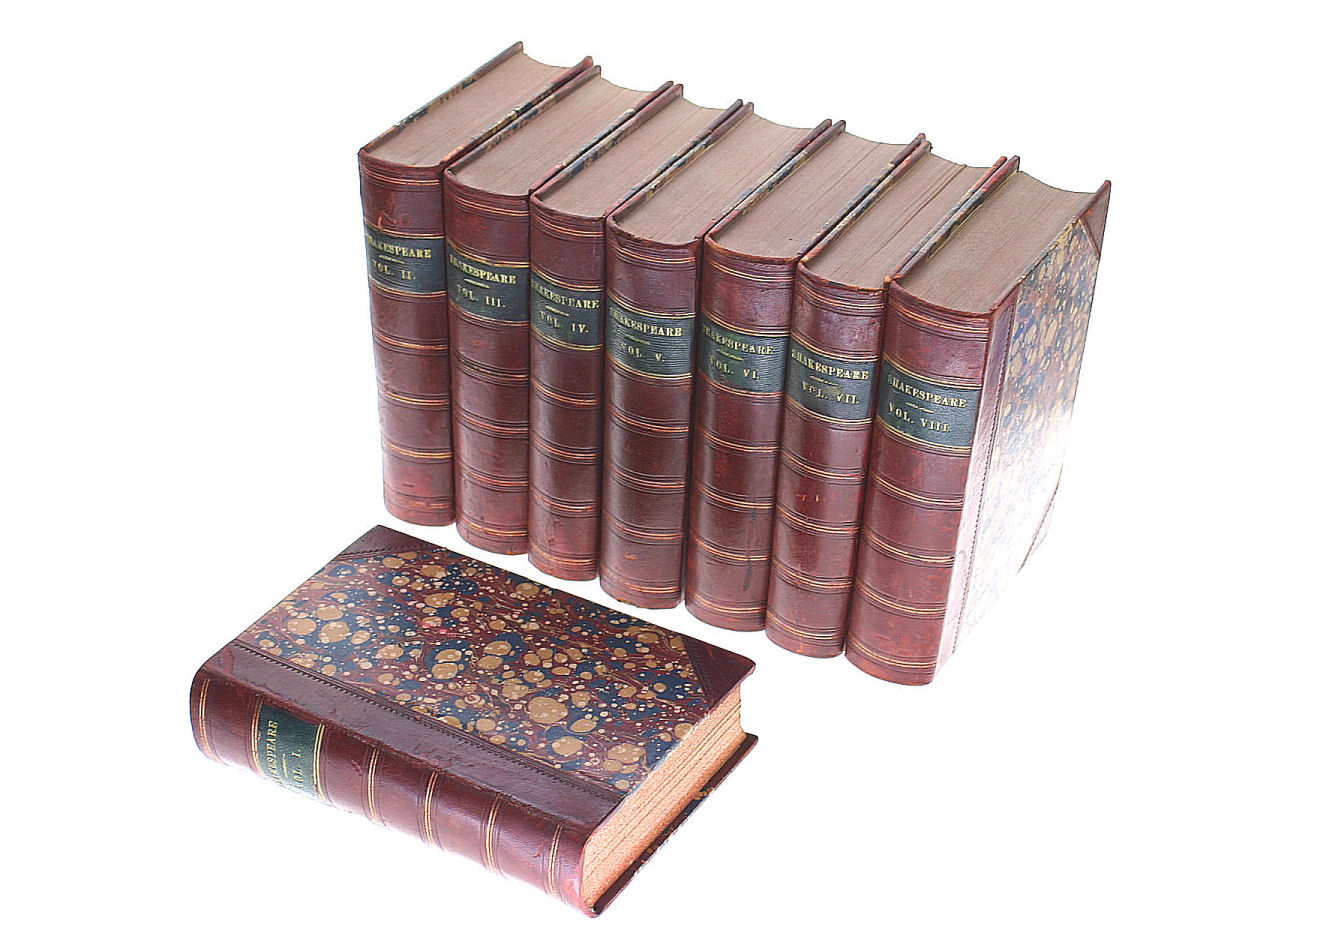 SHAKESPEARE - Dramatic Works of Shakespeare, The Text of the First edition, Eight Volume Set